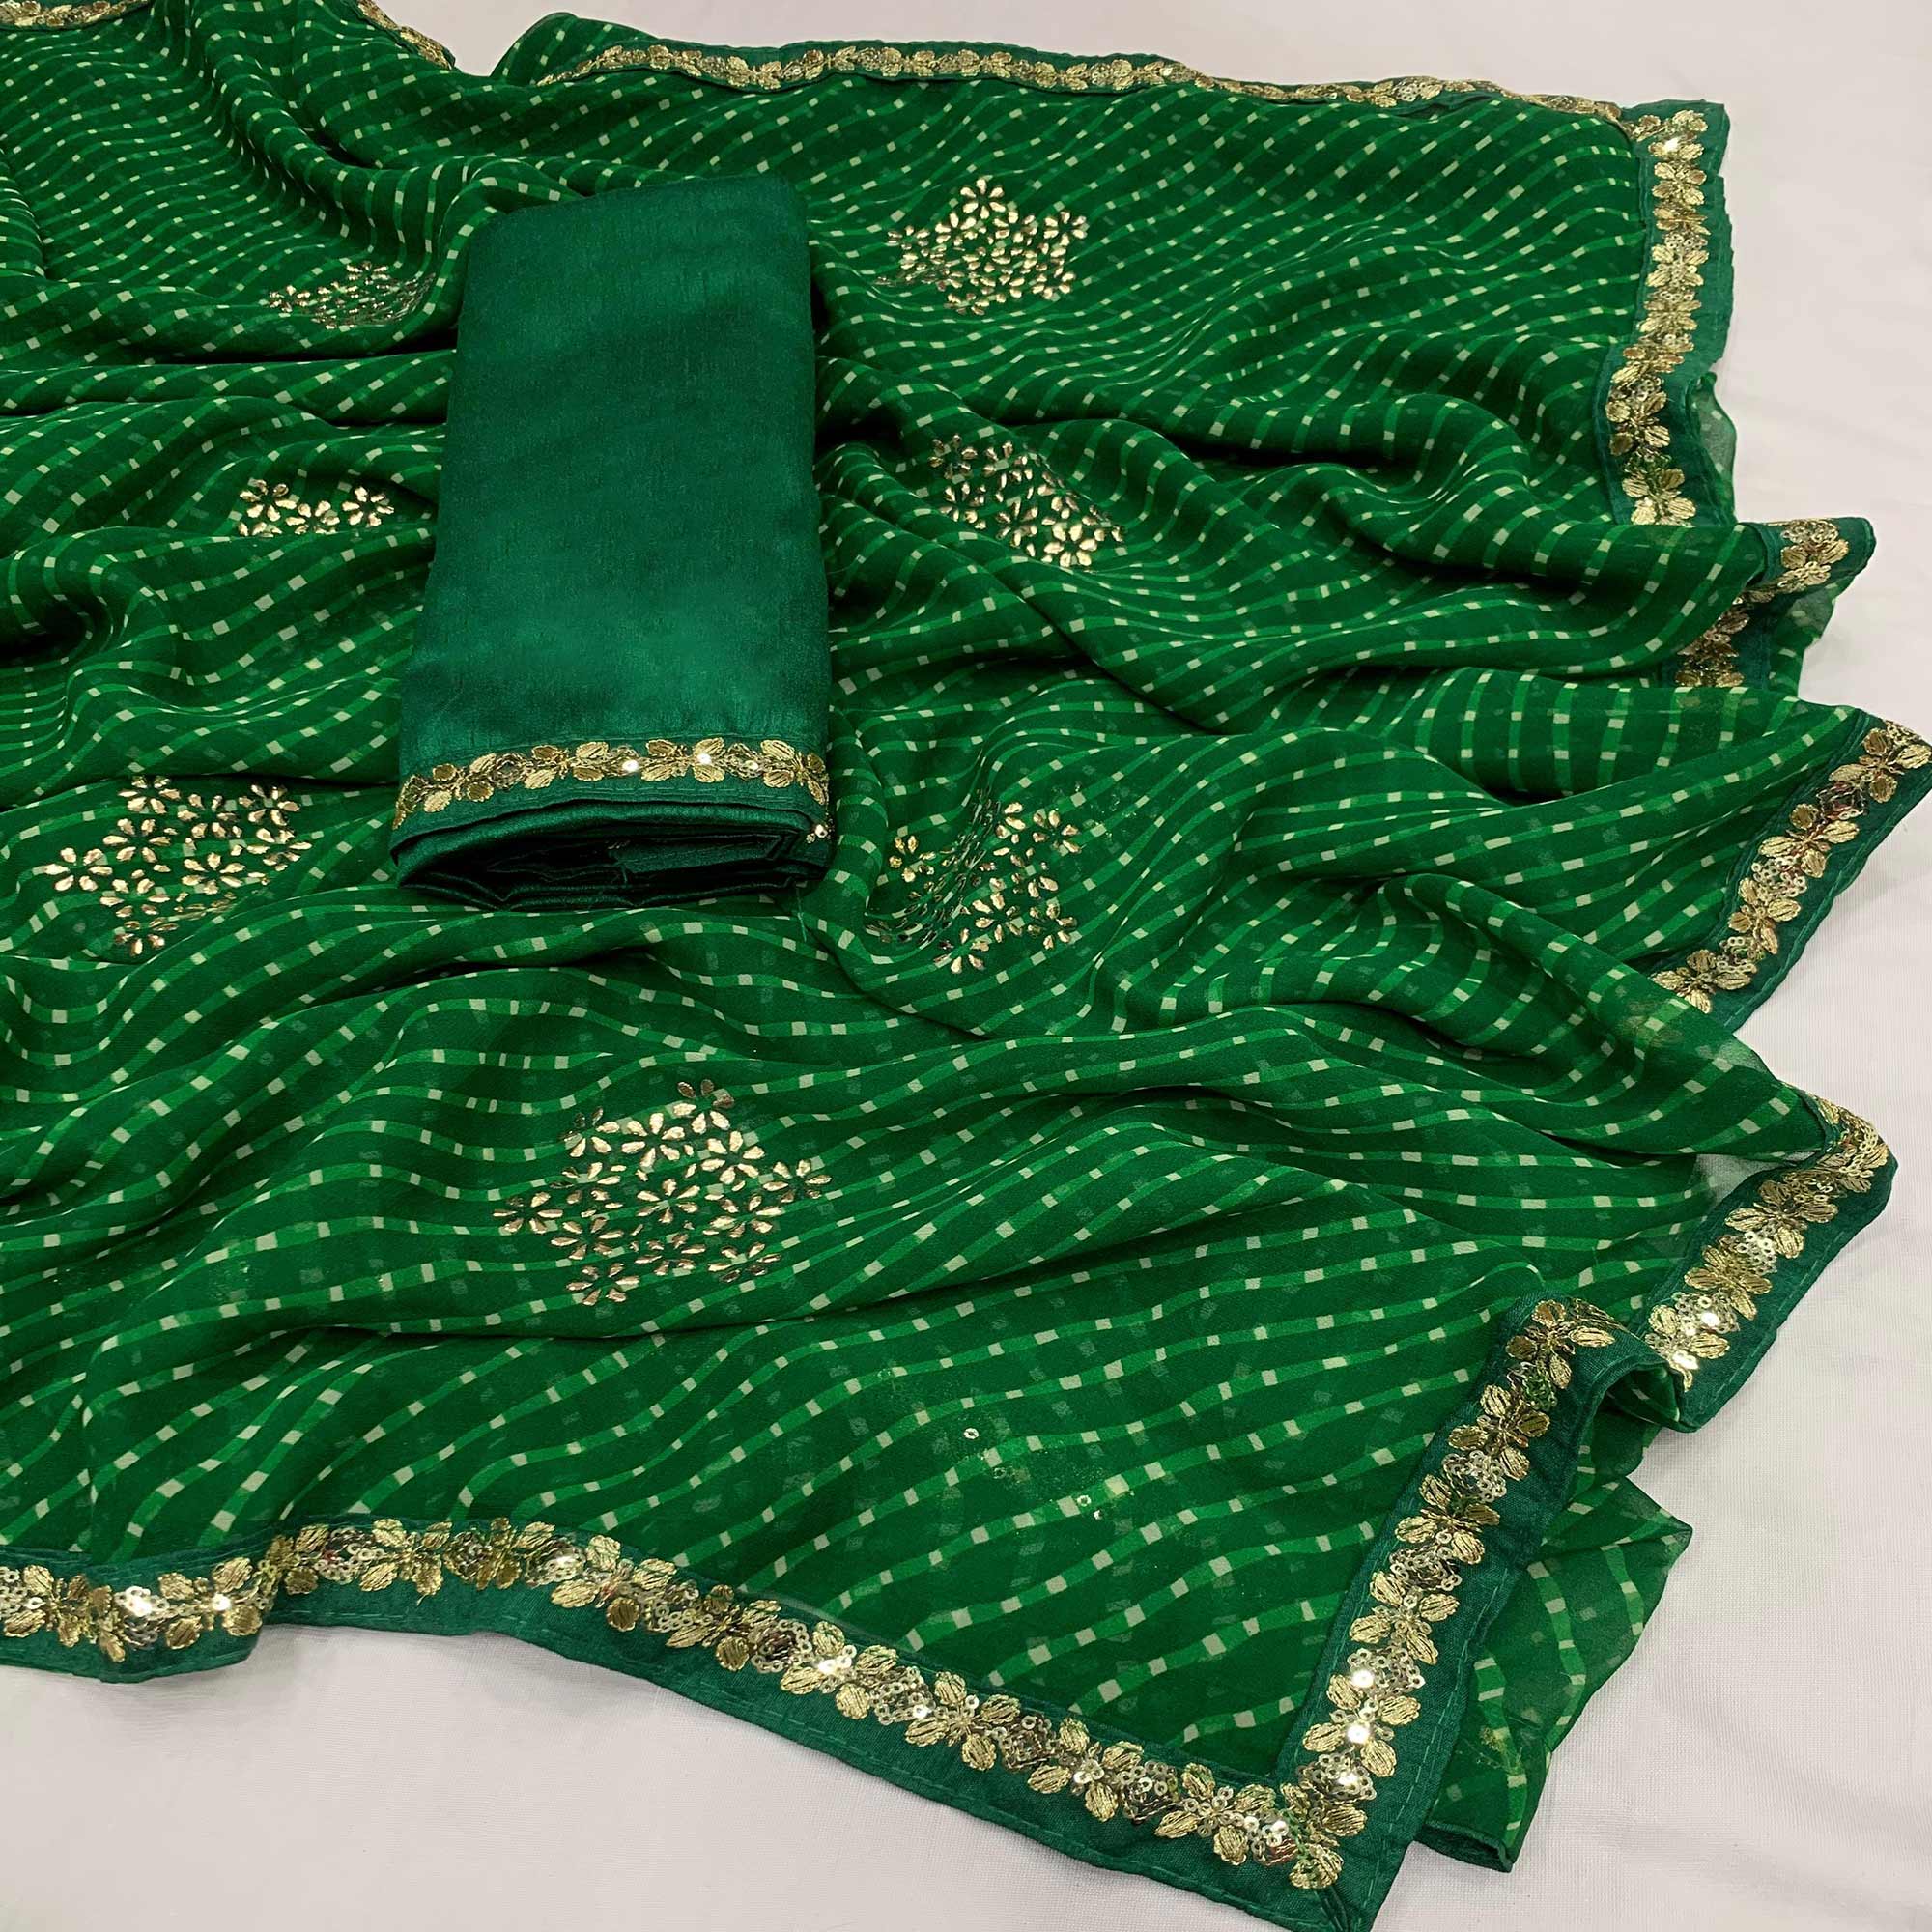 Dark Green Printed Georgette Saree With lace Border